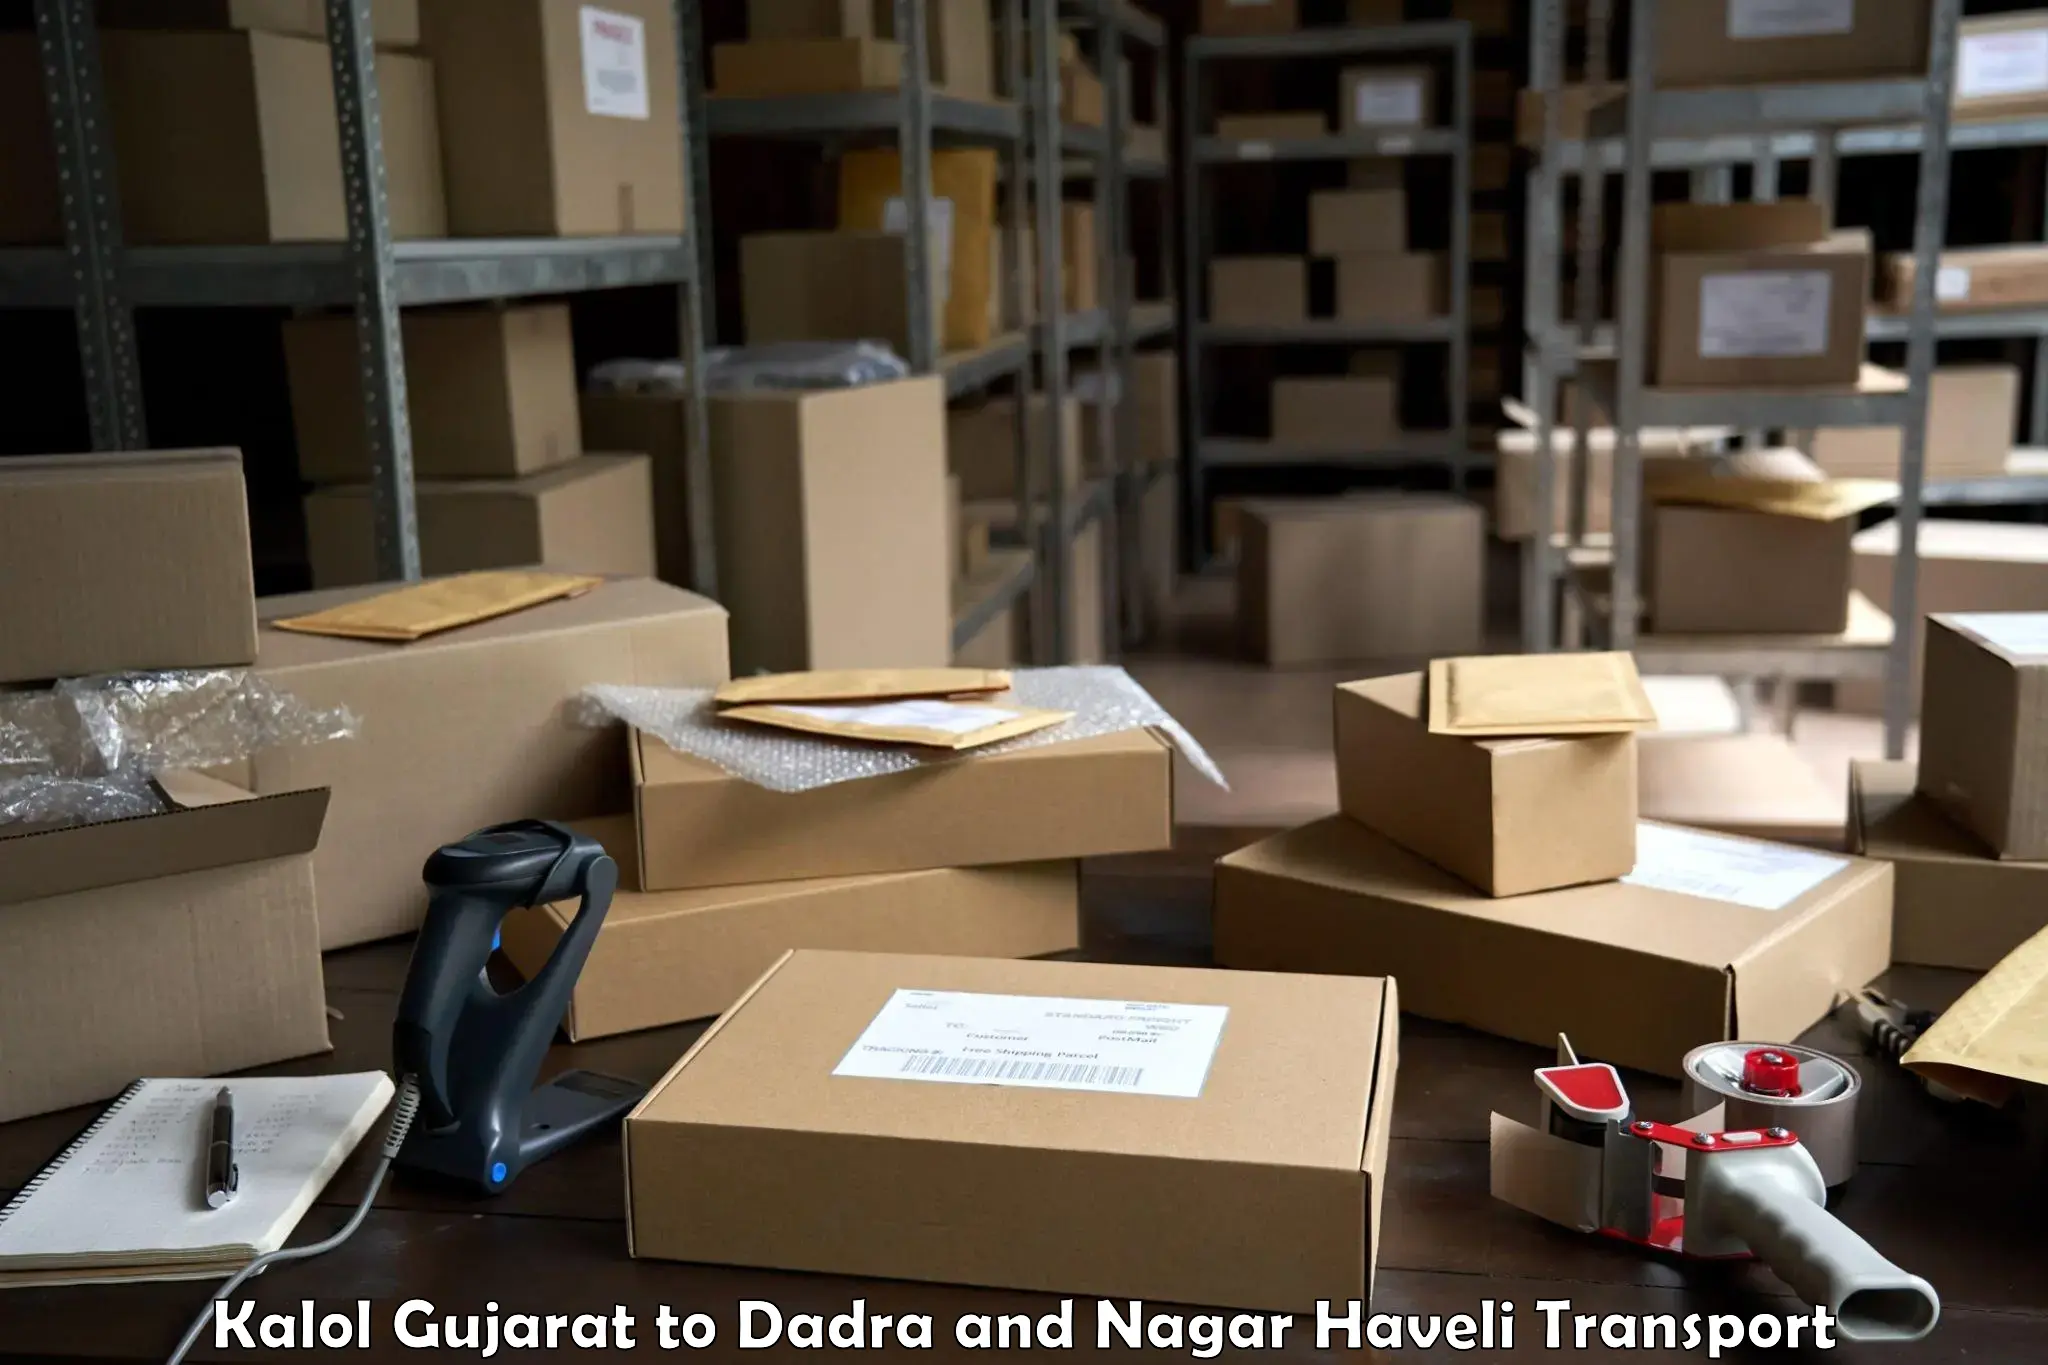 Package delivery services Kalol Gujarat to Dadra and Nagar Haveli